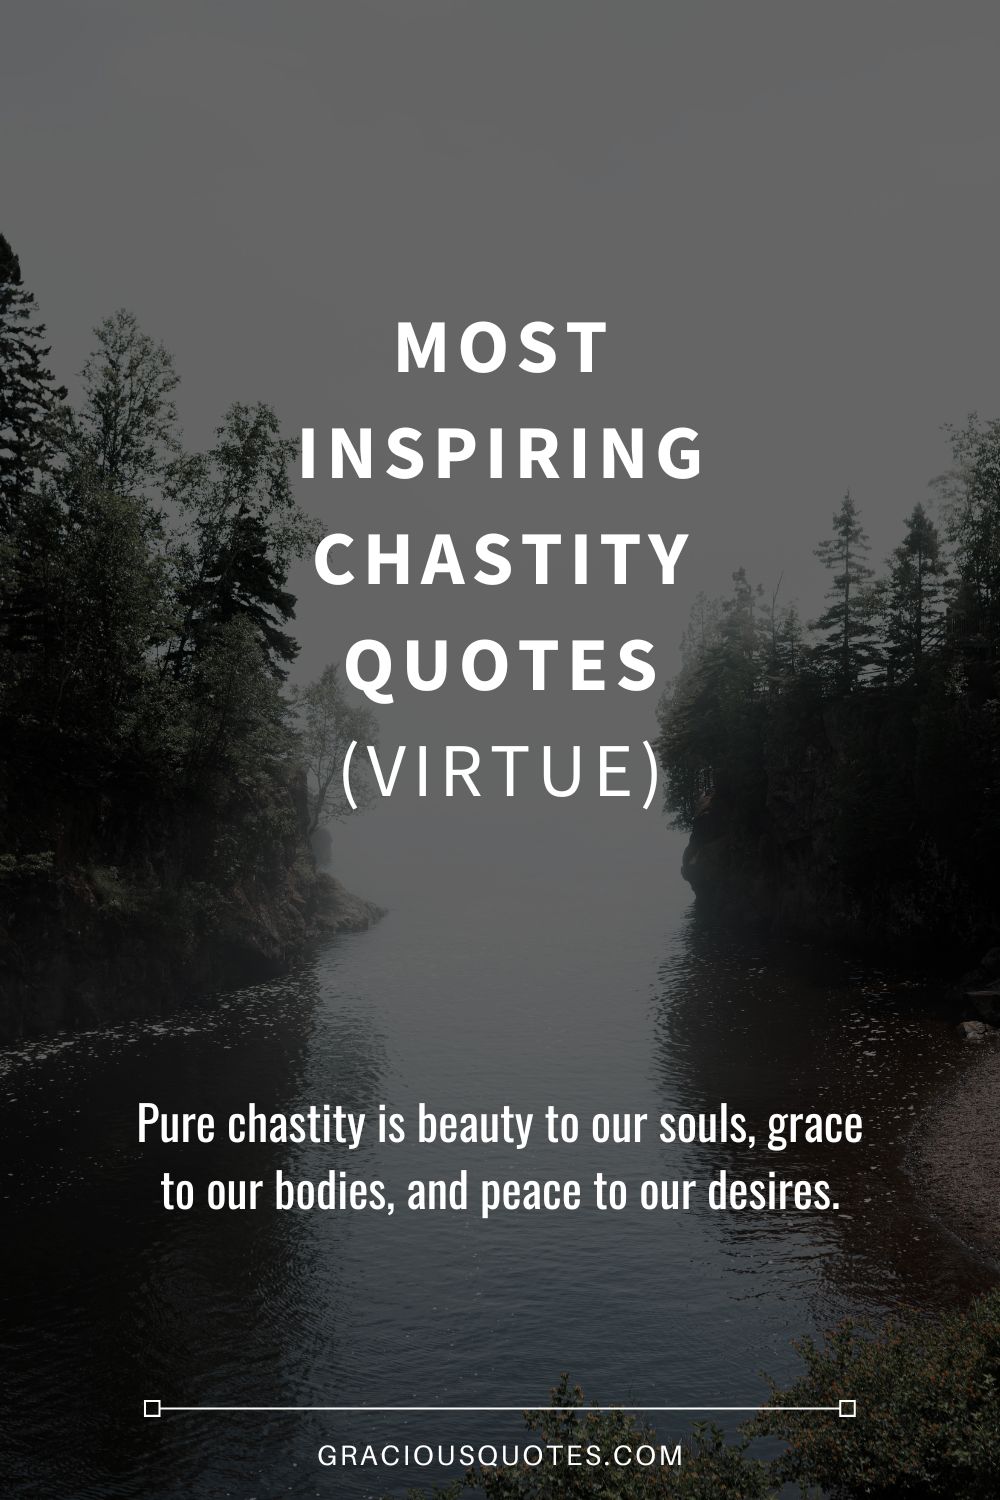 Most Inspiring Chastity Quotes (VIRTUE) - Gracious Quotes